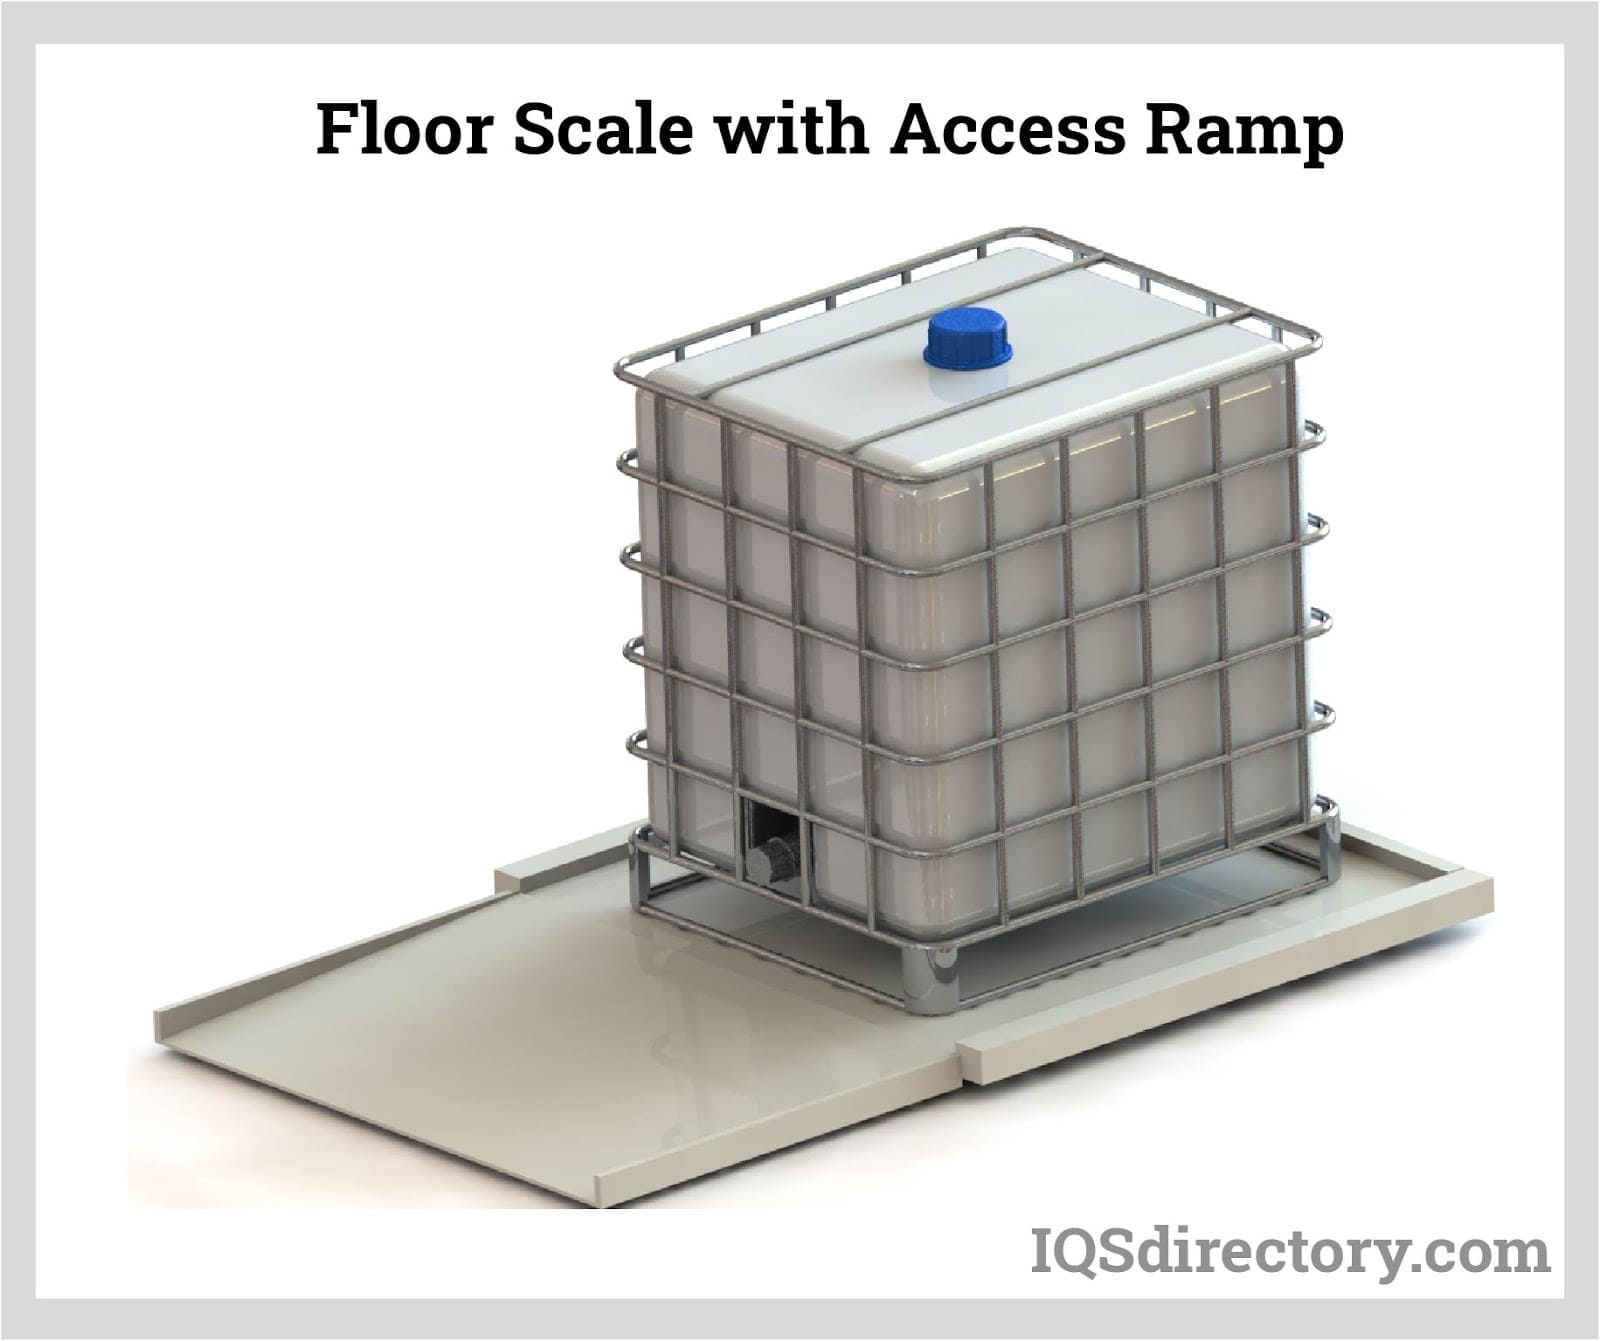 Floor Scale with Access Ramp